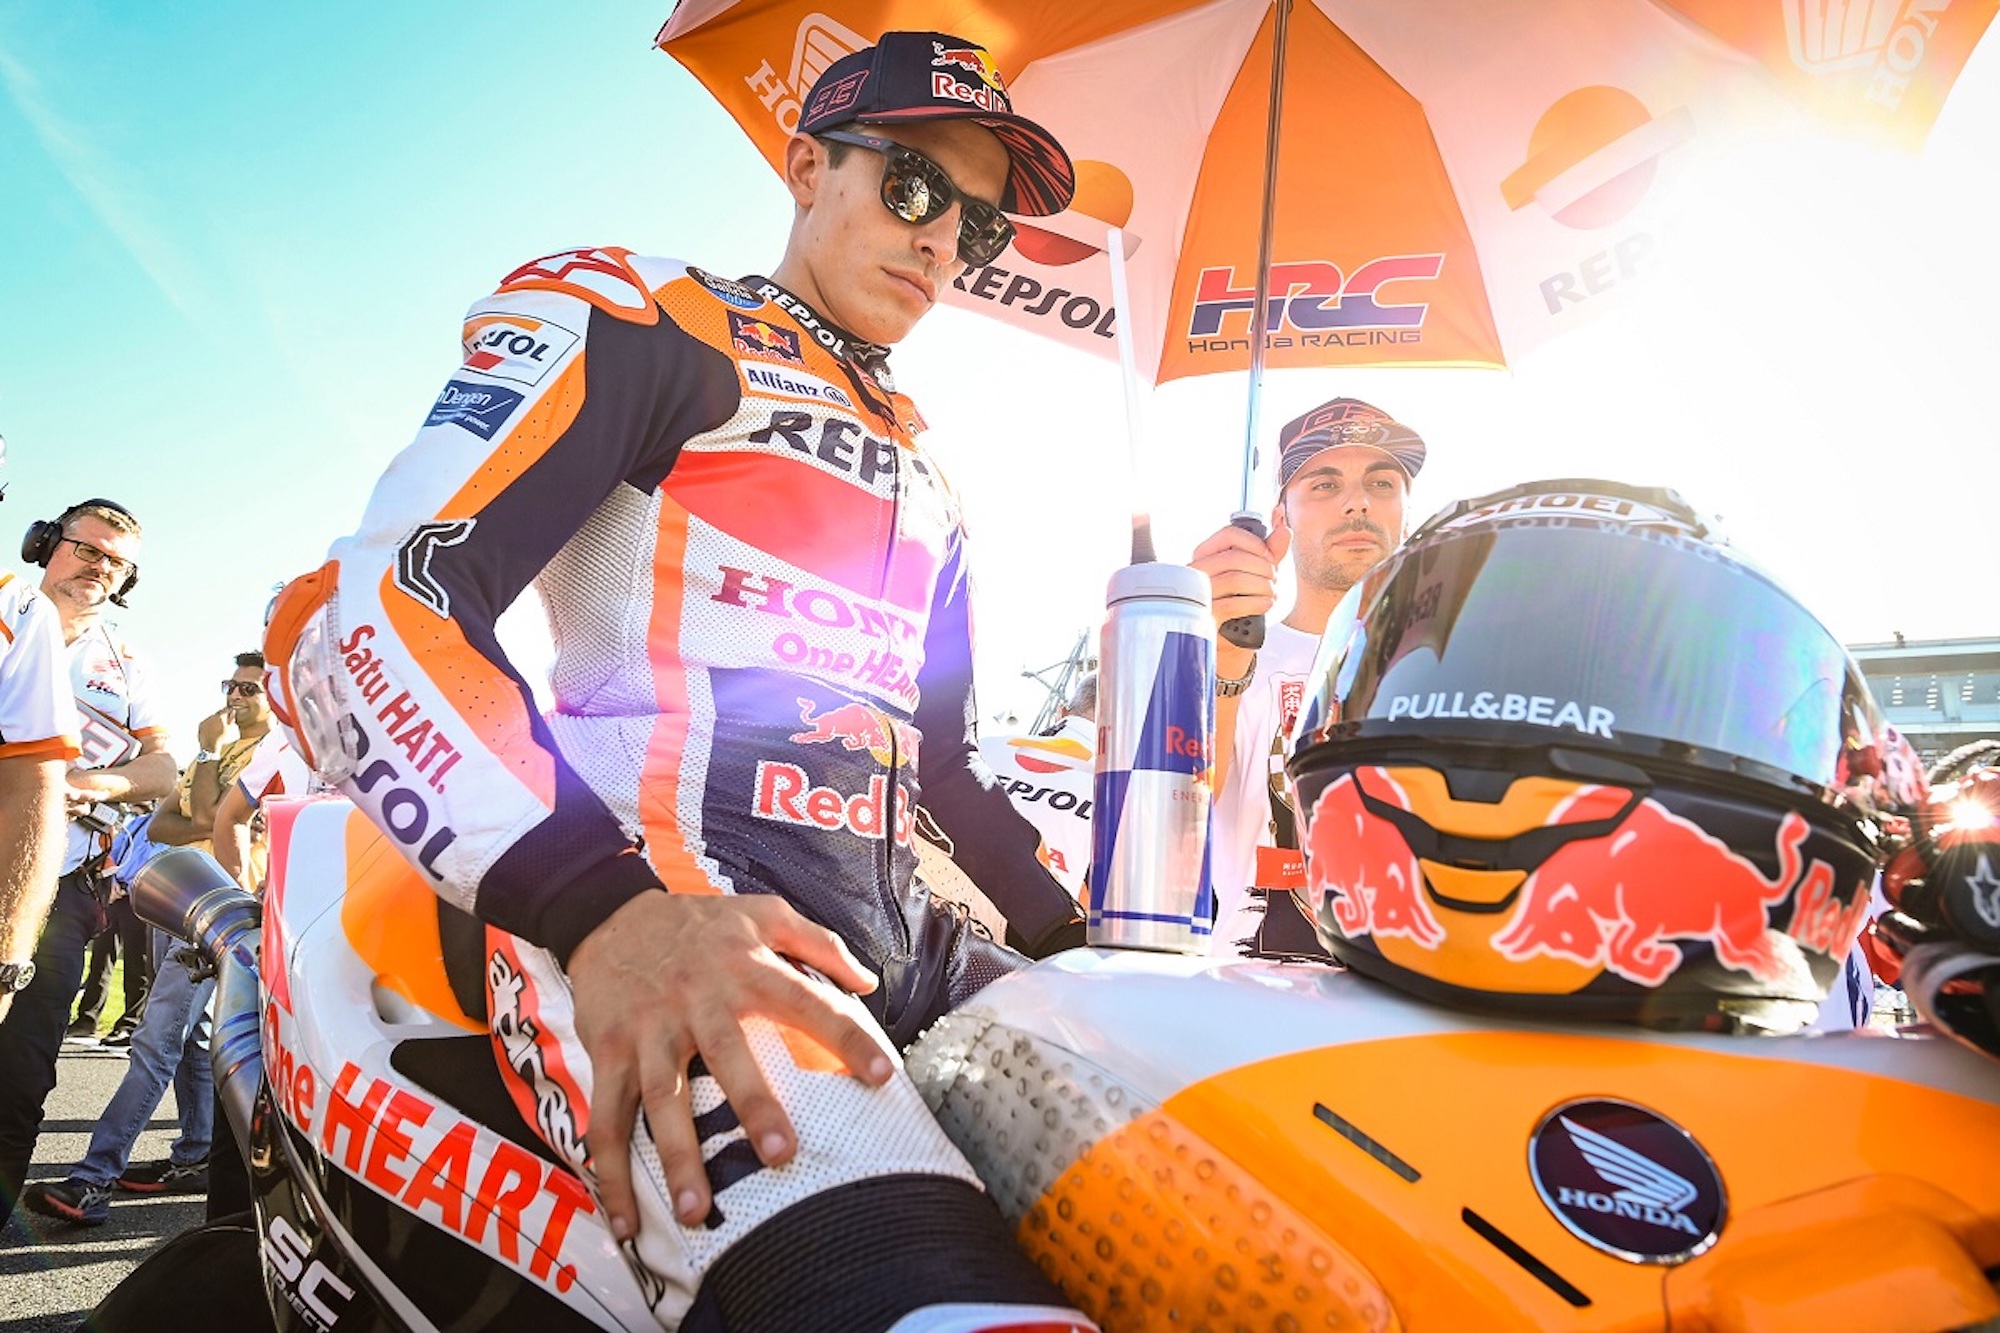 Marc Marquez on his MotoGP machine of choice. Media sourced from Motorcycle Sports.